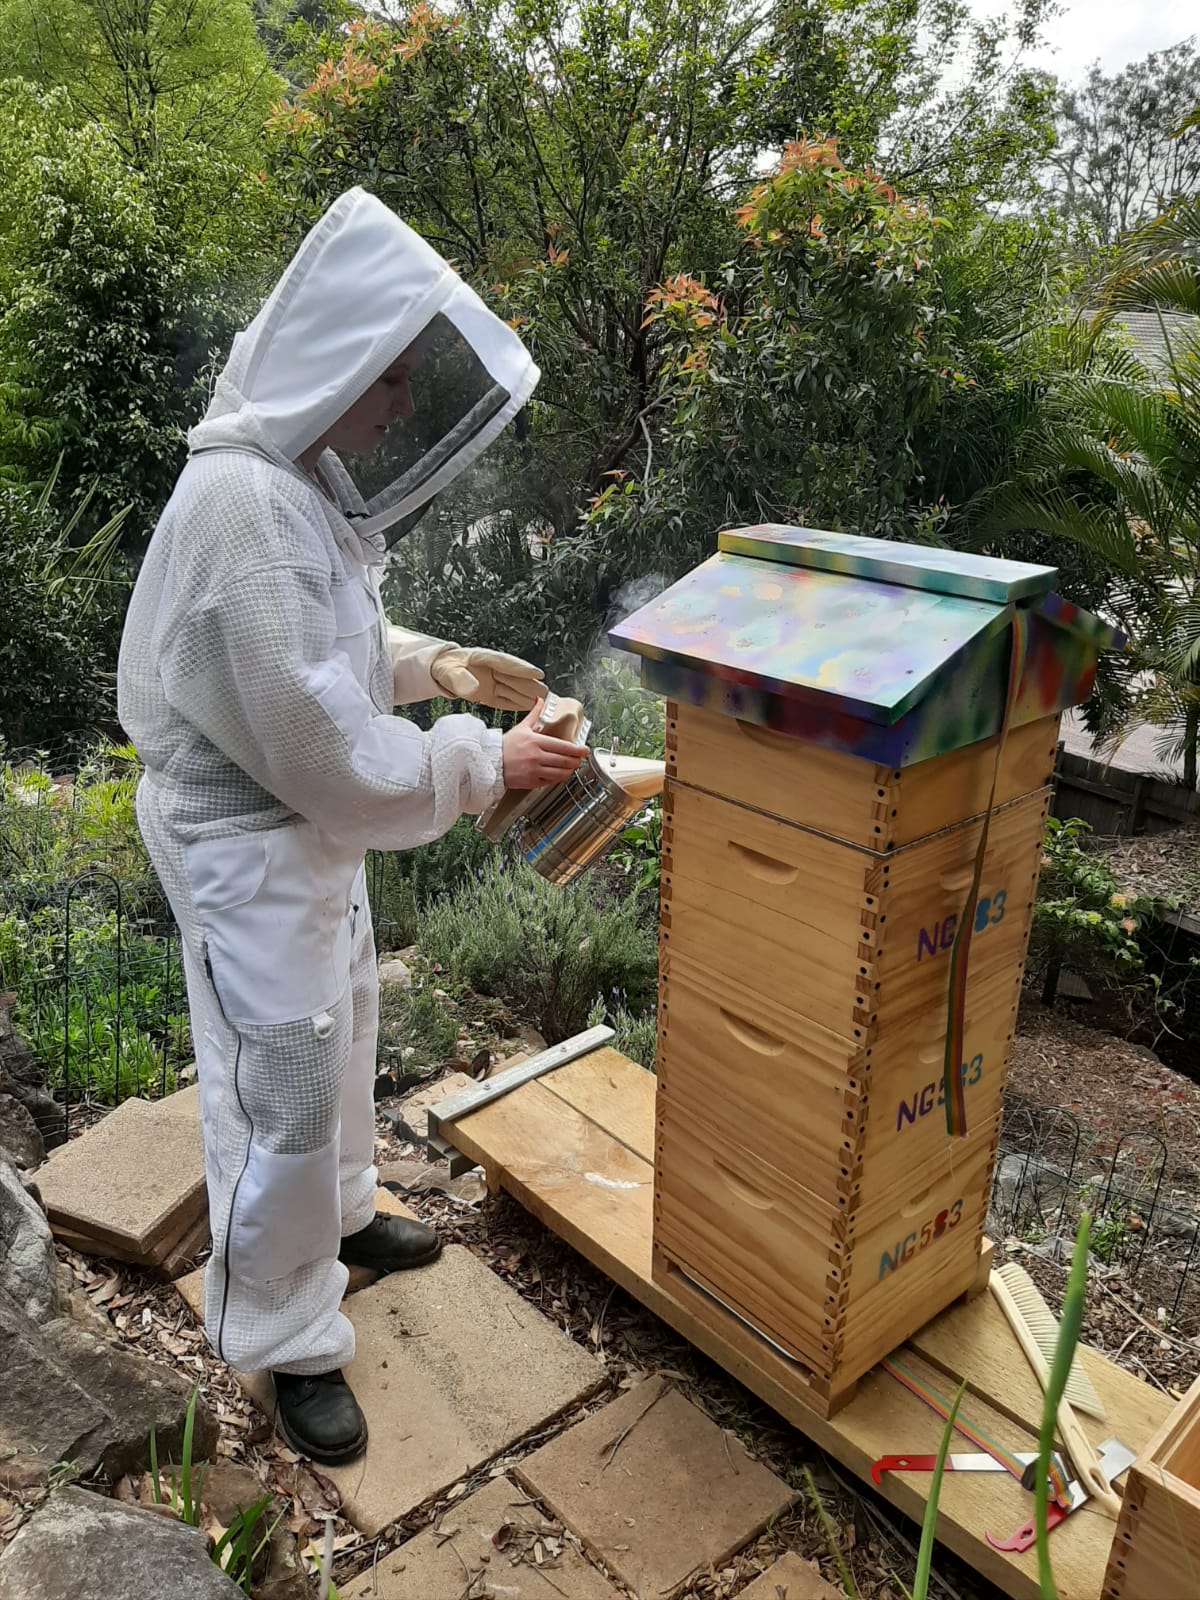 Wendy in her garden tending to her bee hive. She shows how counselling helps relationships